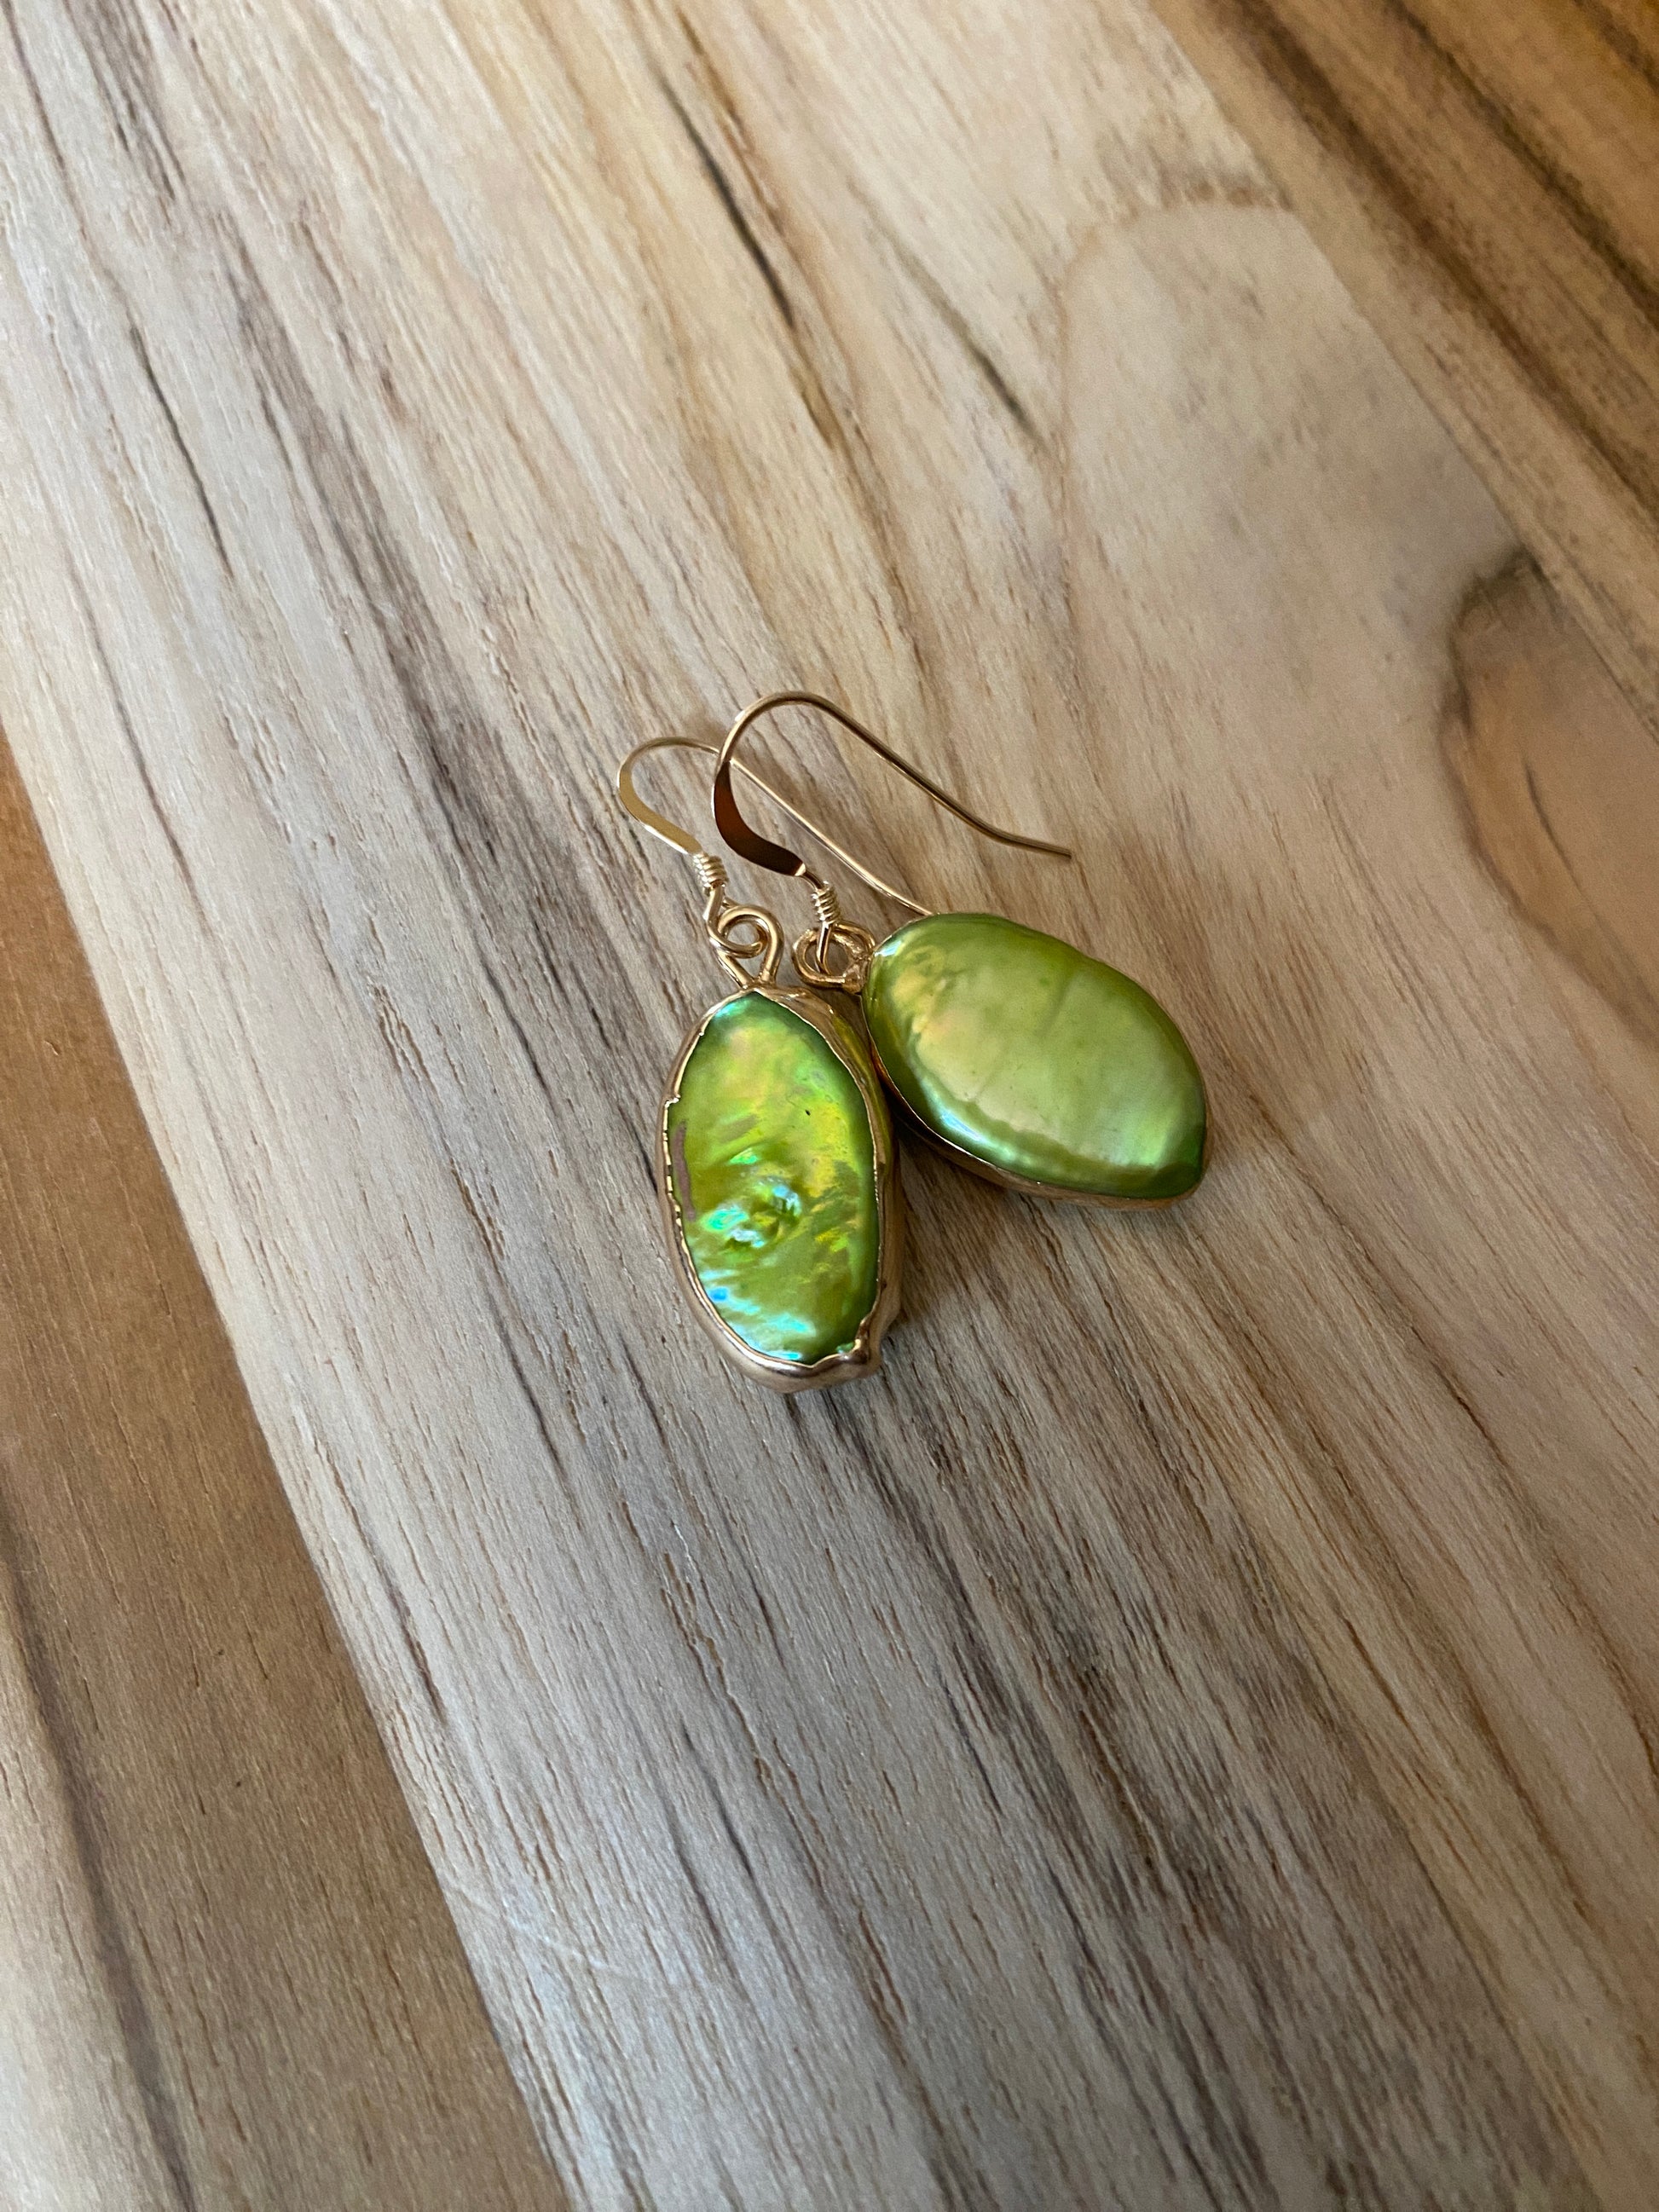 Golden Chartreuse Green Pearl Dangle Earrings with Gold Filled Ear Wires - My Urban Gems